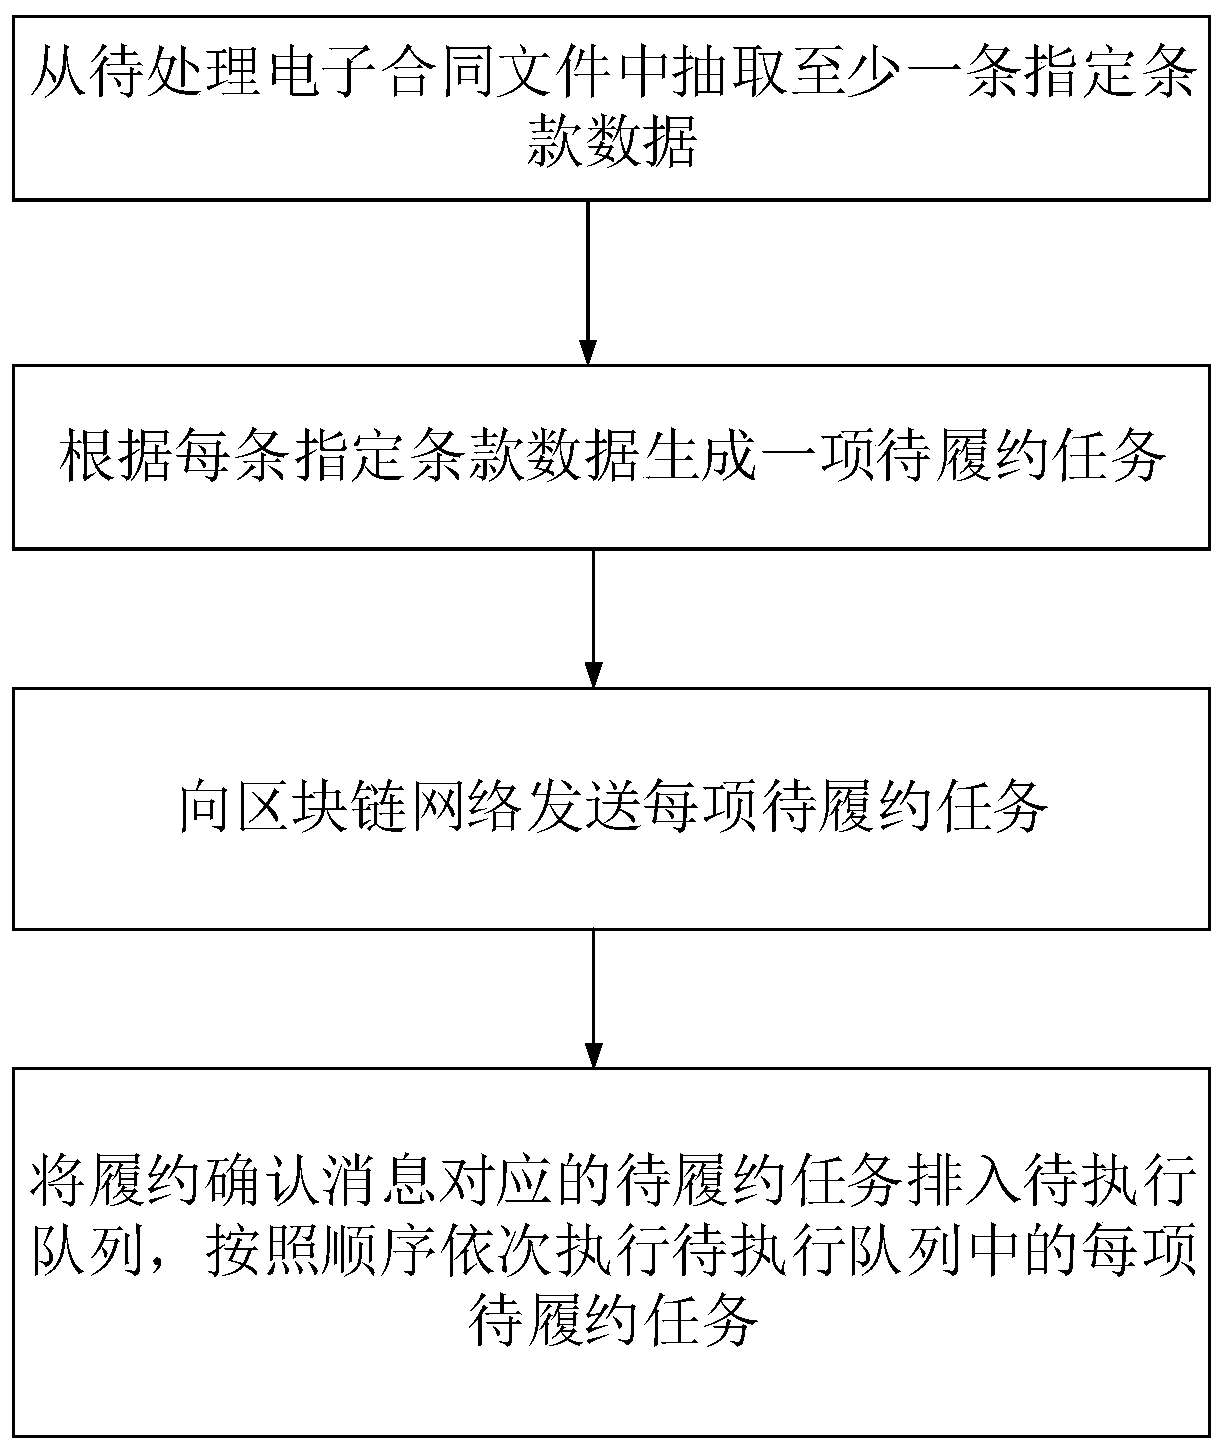 Electronic contract automatic performance processing method based on block chain